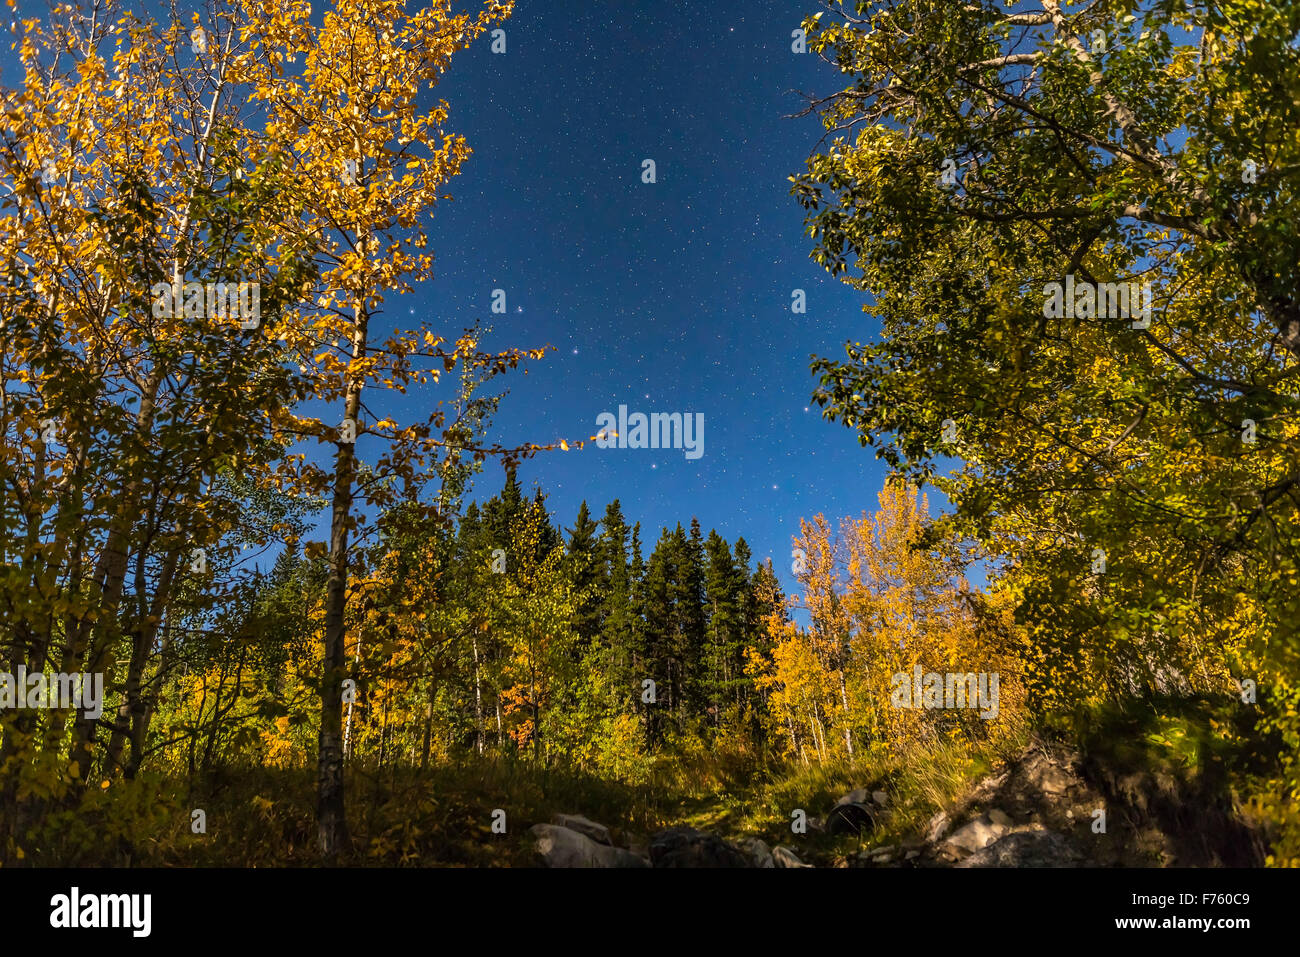 The Big Dipper low in the north on a moonlit autumn night, with the aspen trees in full autumn colour. I shot this at Elboe Fall Stock Photo